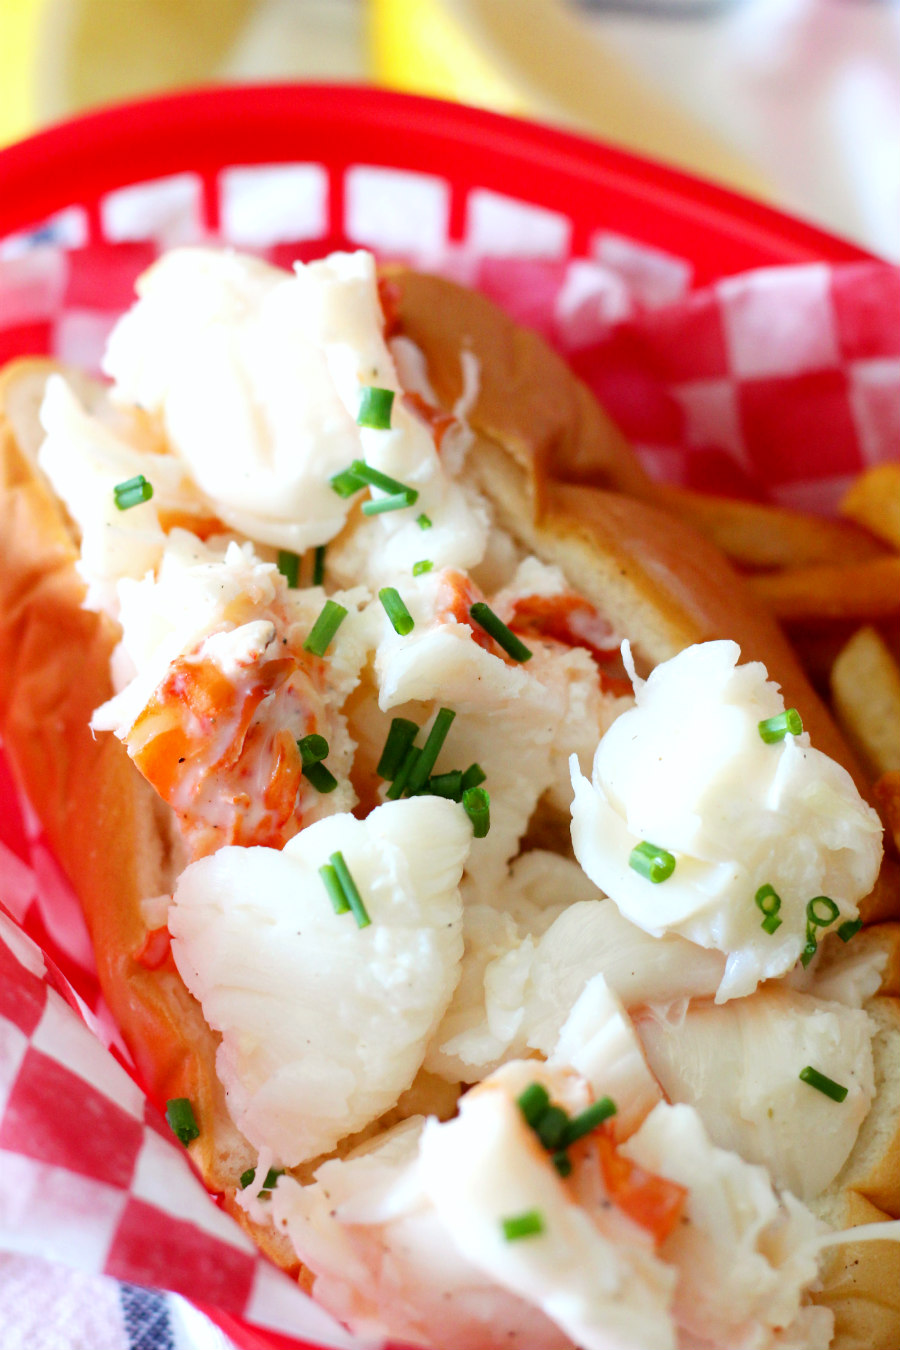 If you're craving the perfect deli-style sandwich, these Classic Jersey Shore Lobster Rolls are for you! A 30-minute meal resulting in the iconic sandwich found at waterfront restaurants down the shore.